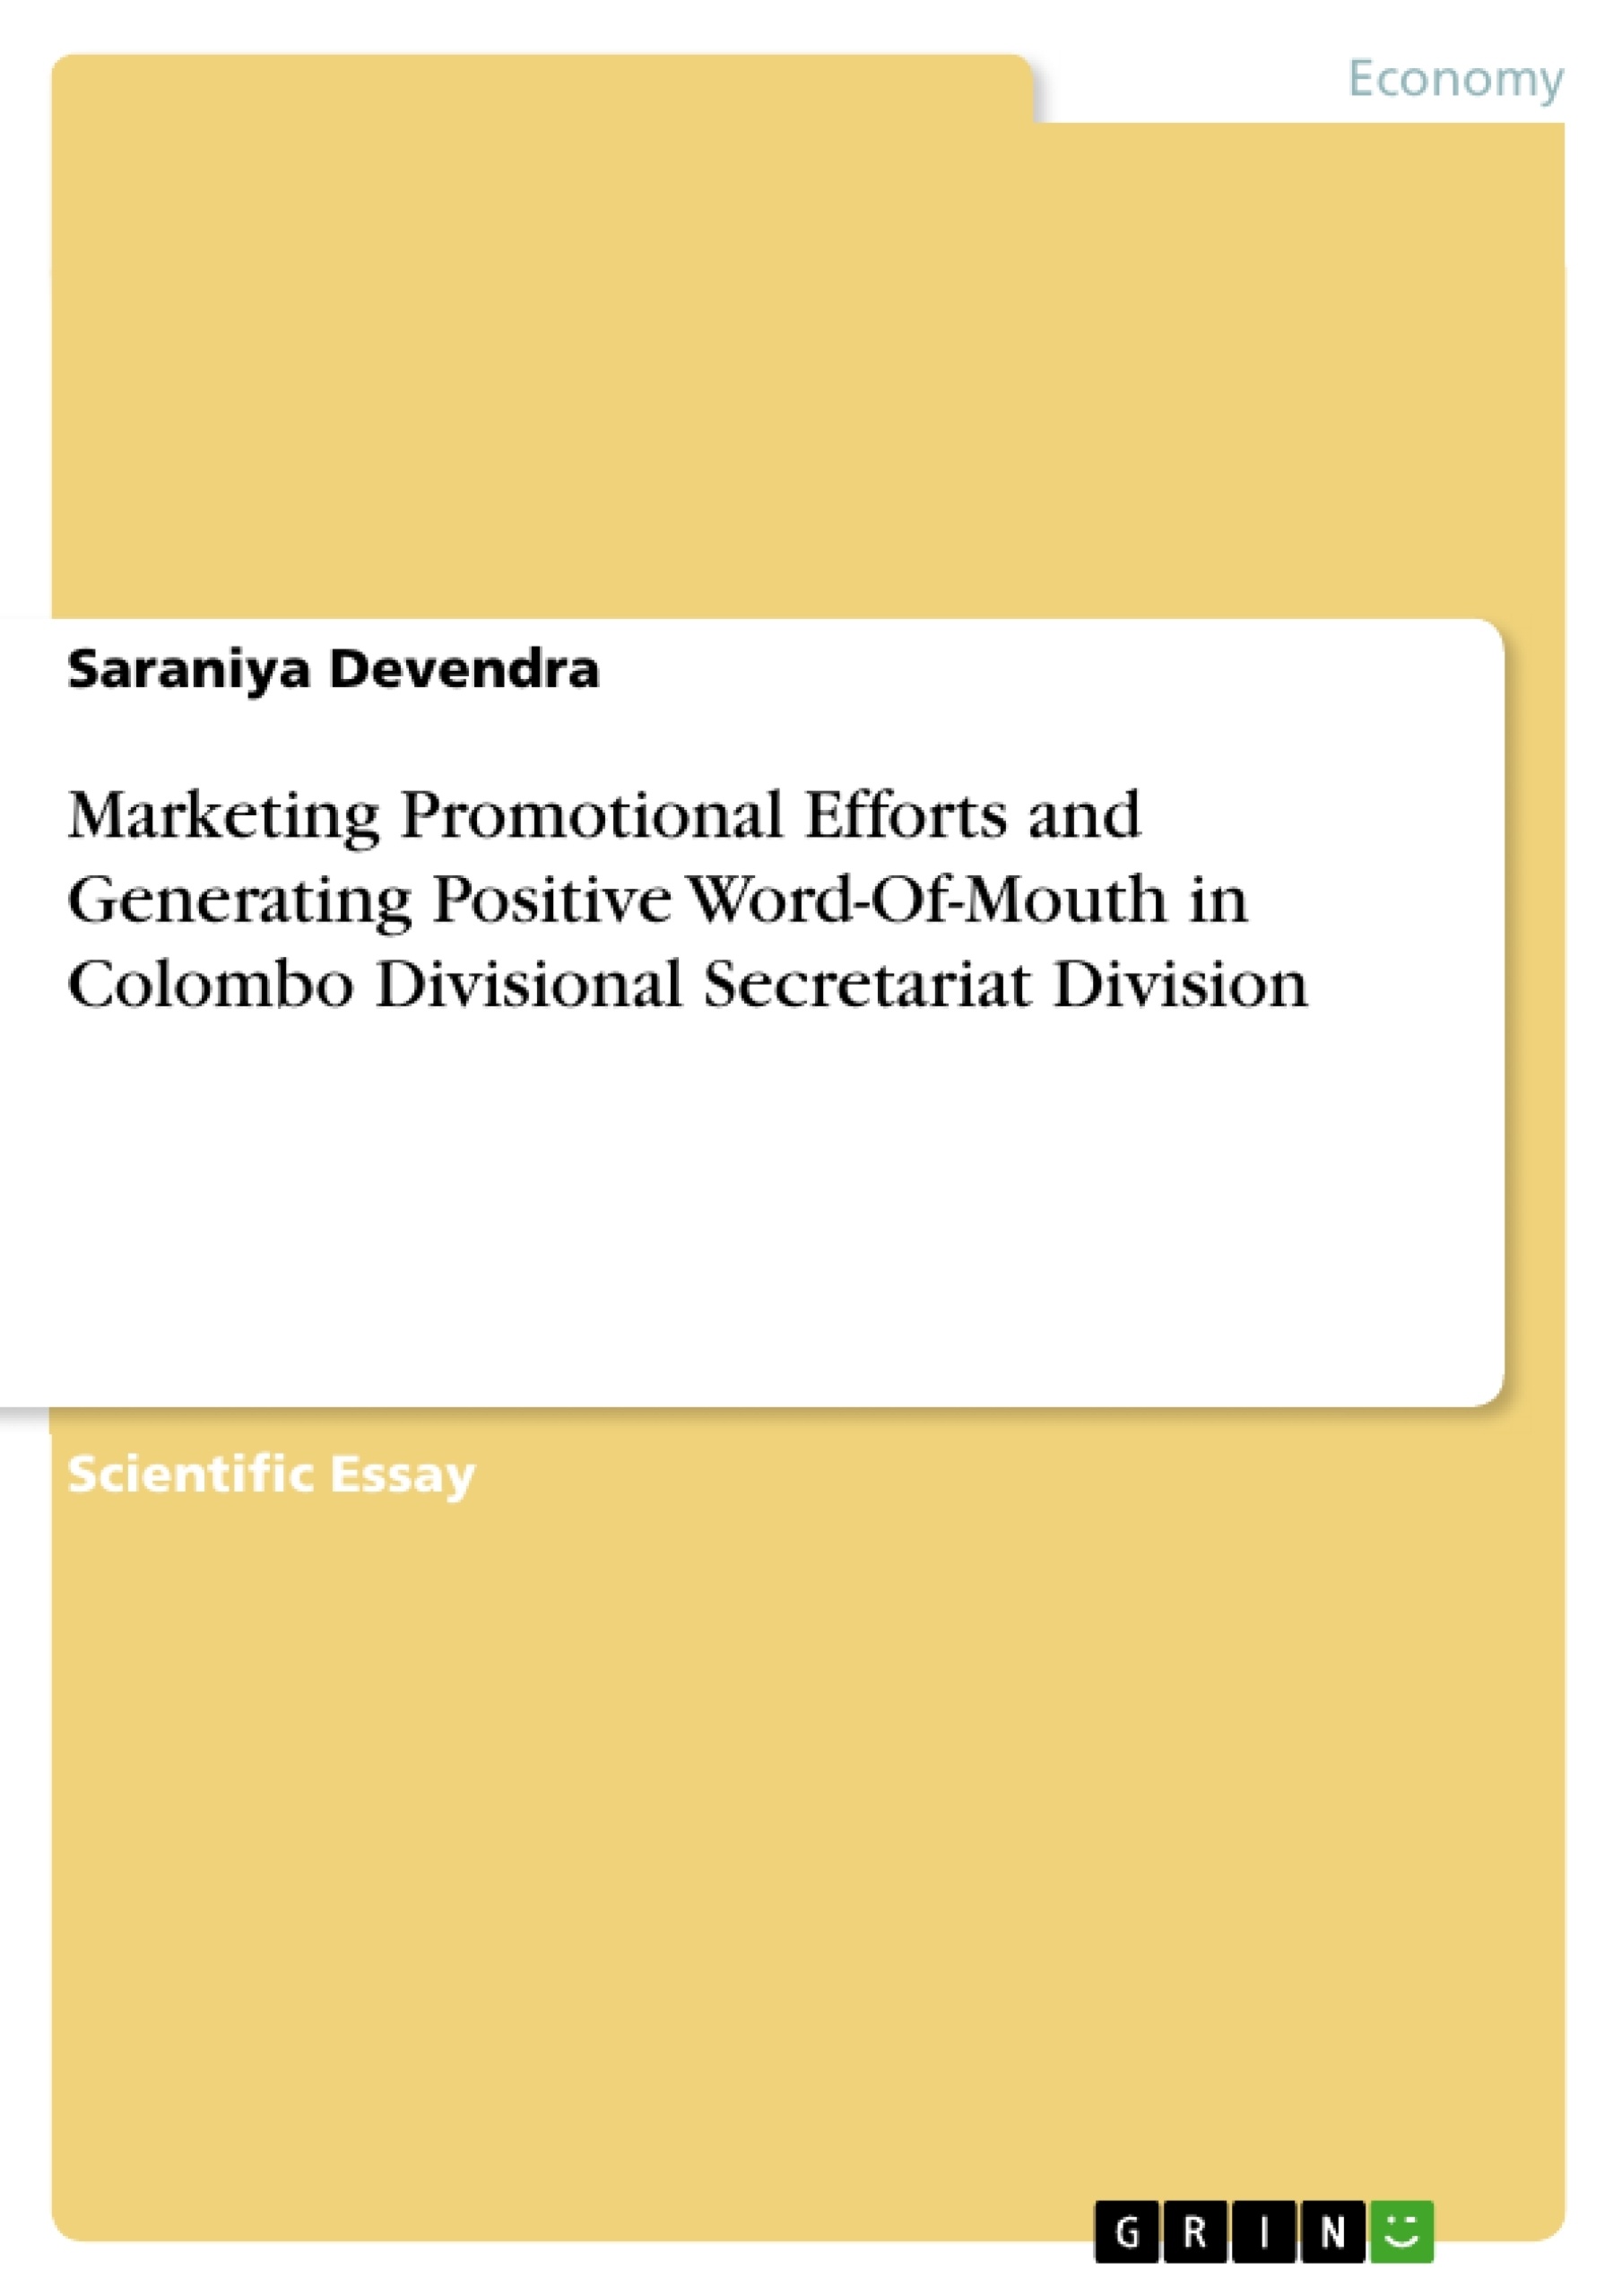 Titre: Marketing Promotional Efforts and Generating Positive Word-Of-Mouth in Colombo Divisional Secretariat Division